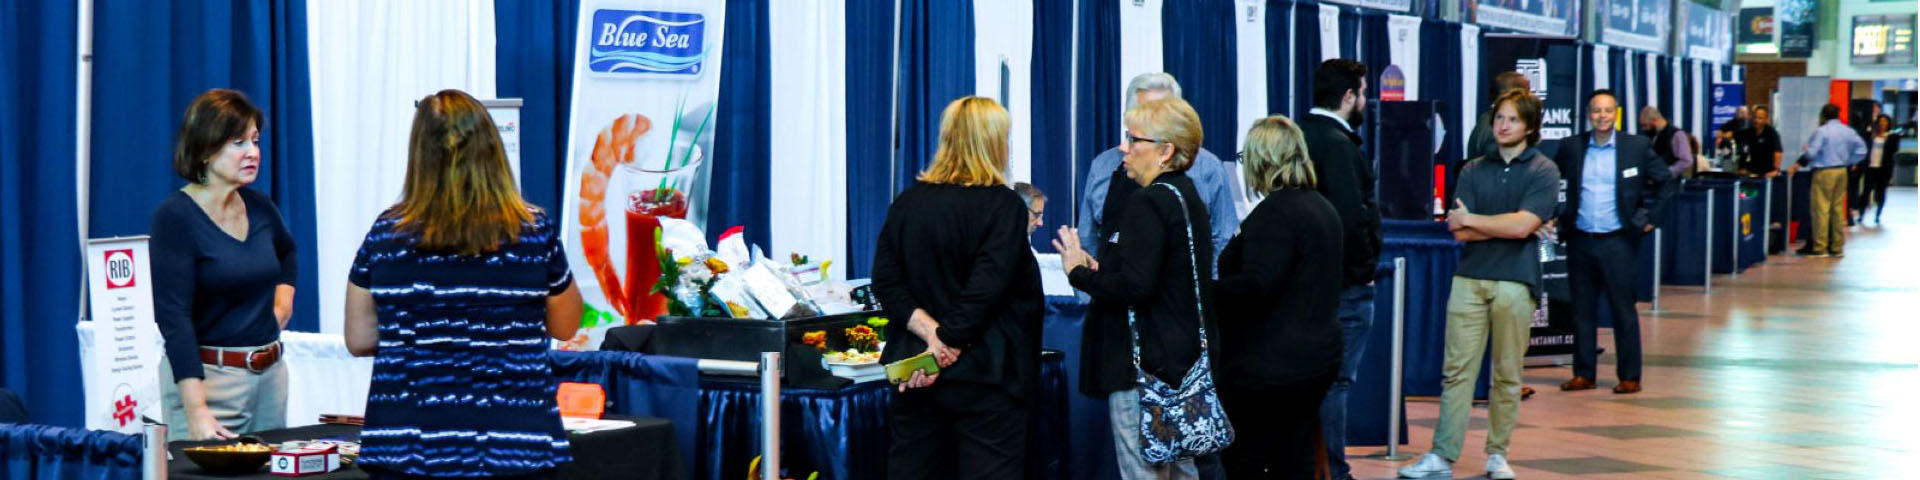 Shoppers interact and explore potential partnerships at the 2022 Supplier Diversity Trade Fair.